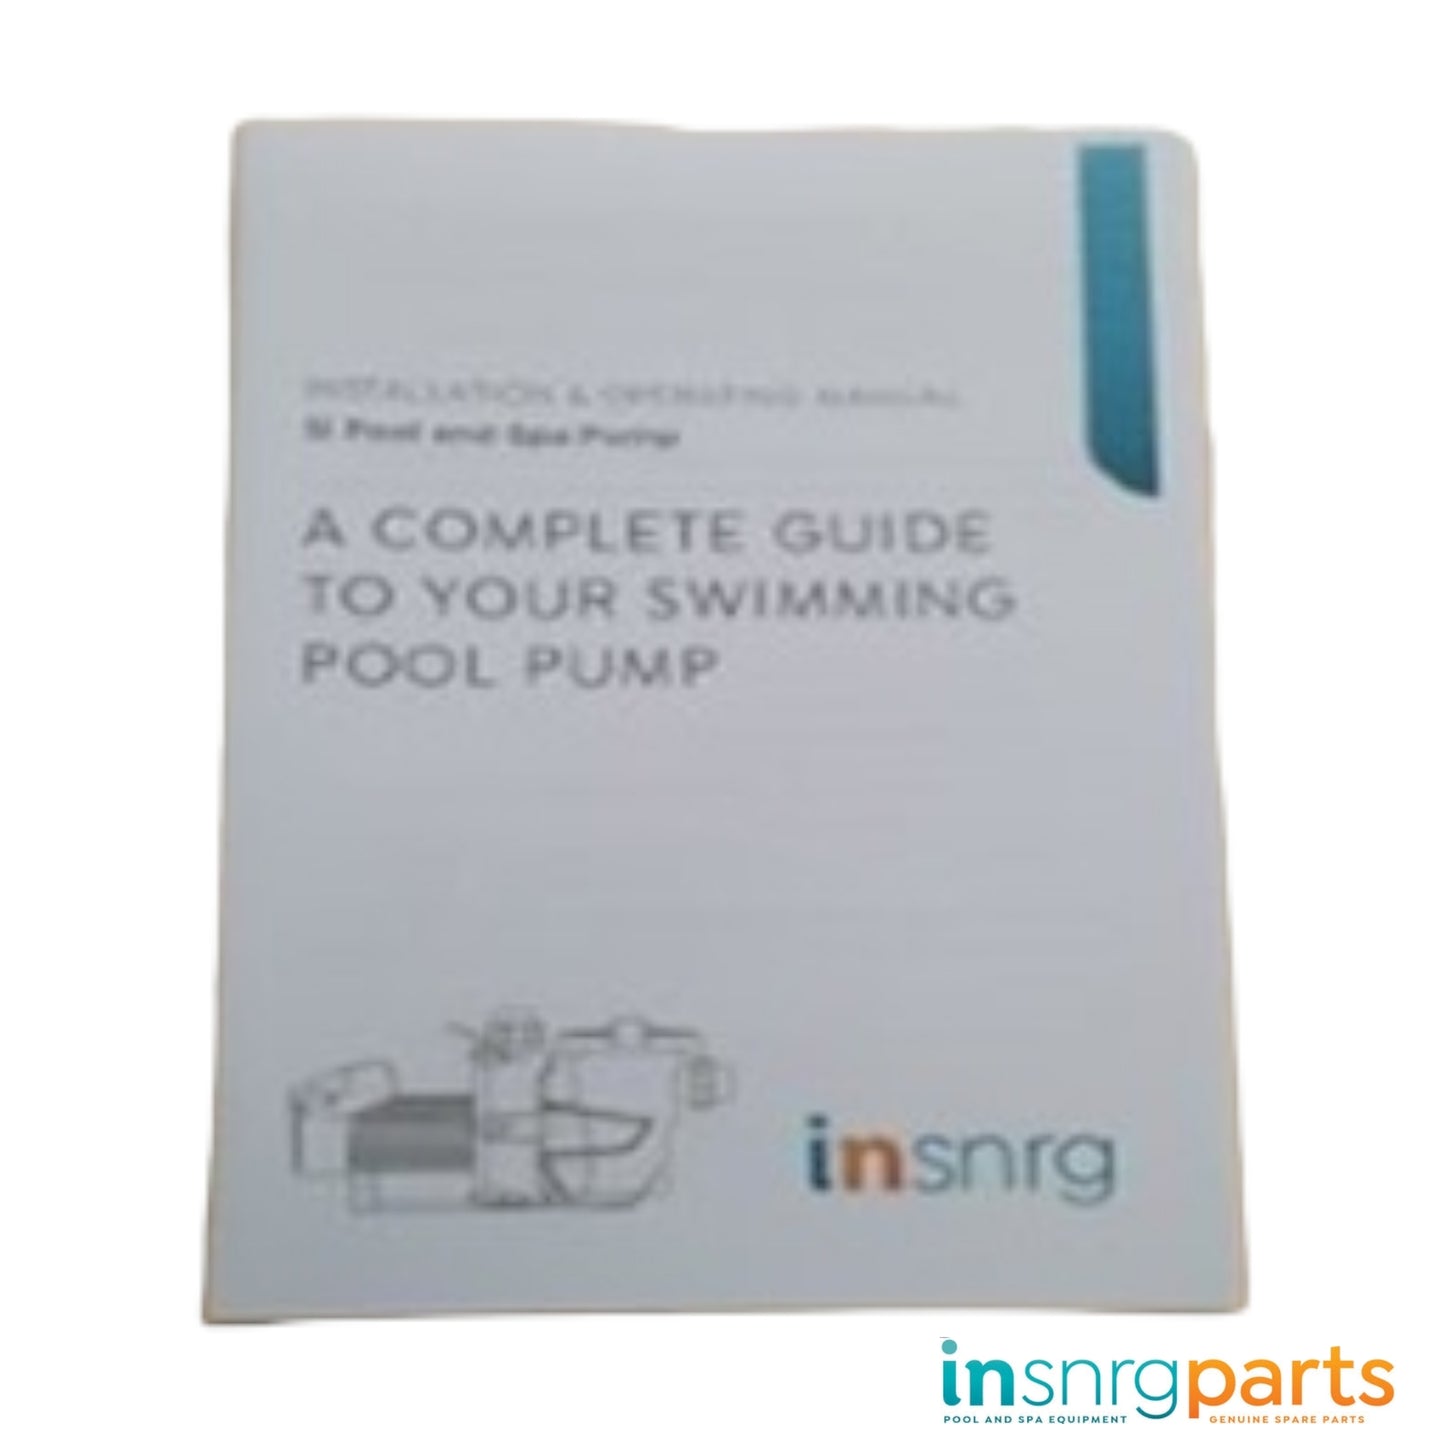 Manual for Qi Variable Speed Pump (Physical Copy) - Insnrg Qi Pumps [156012]